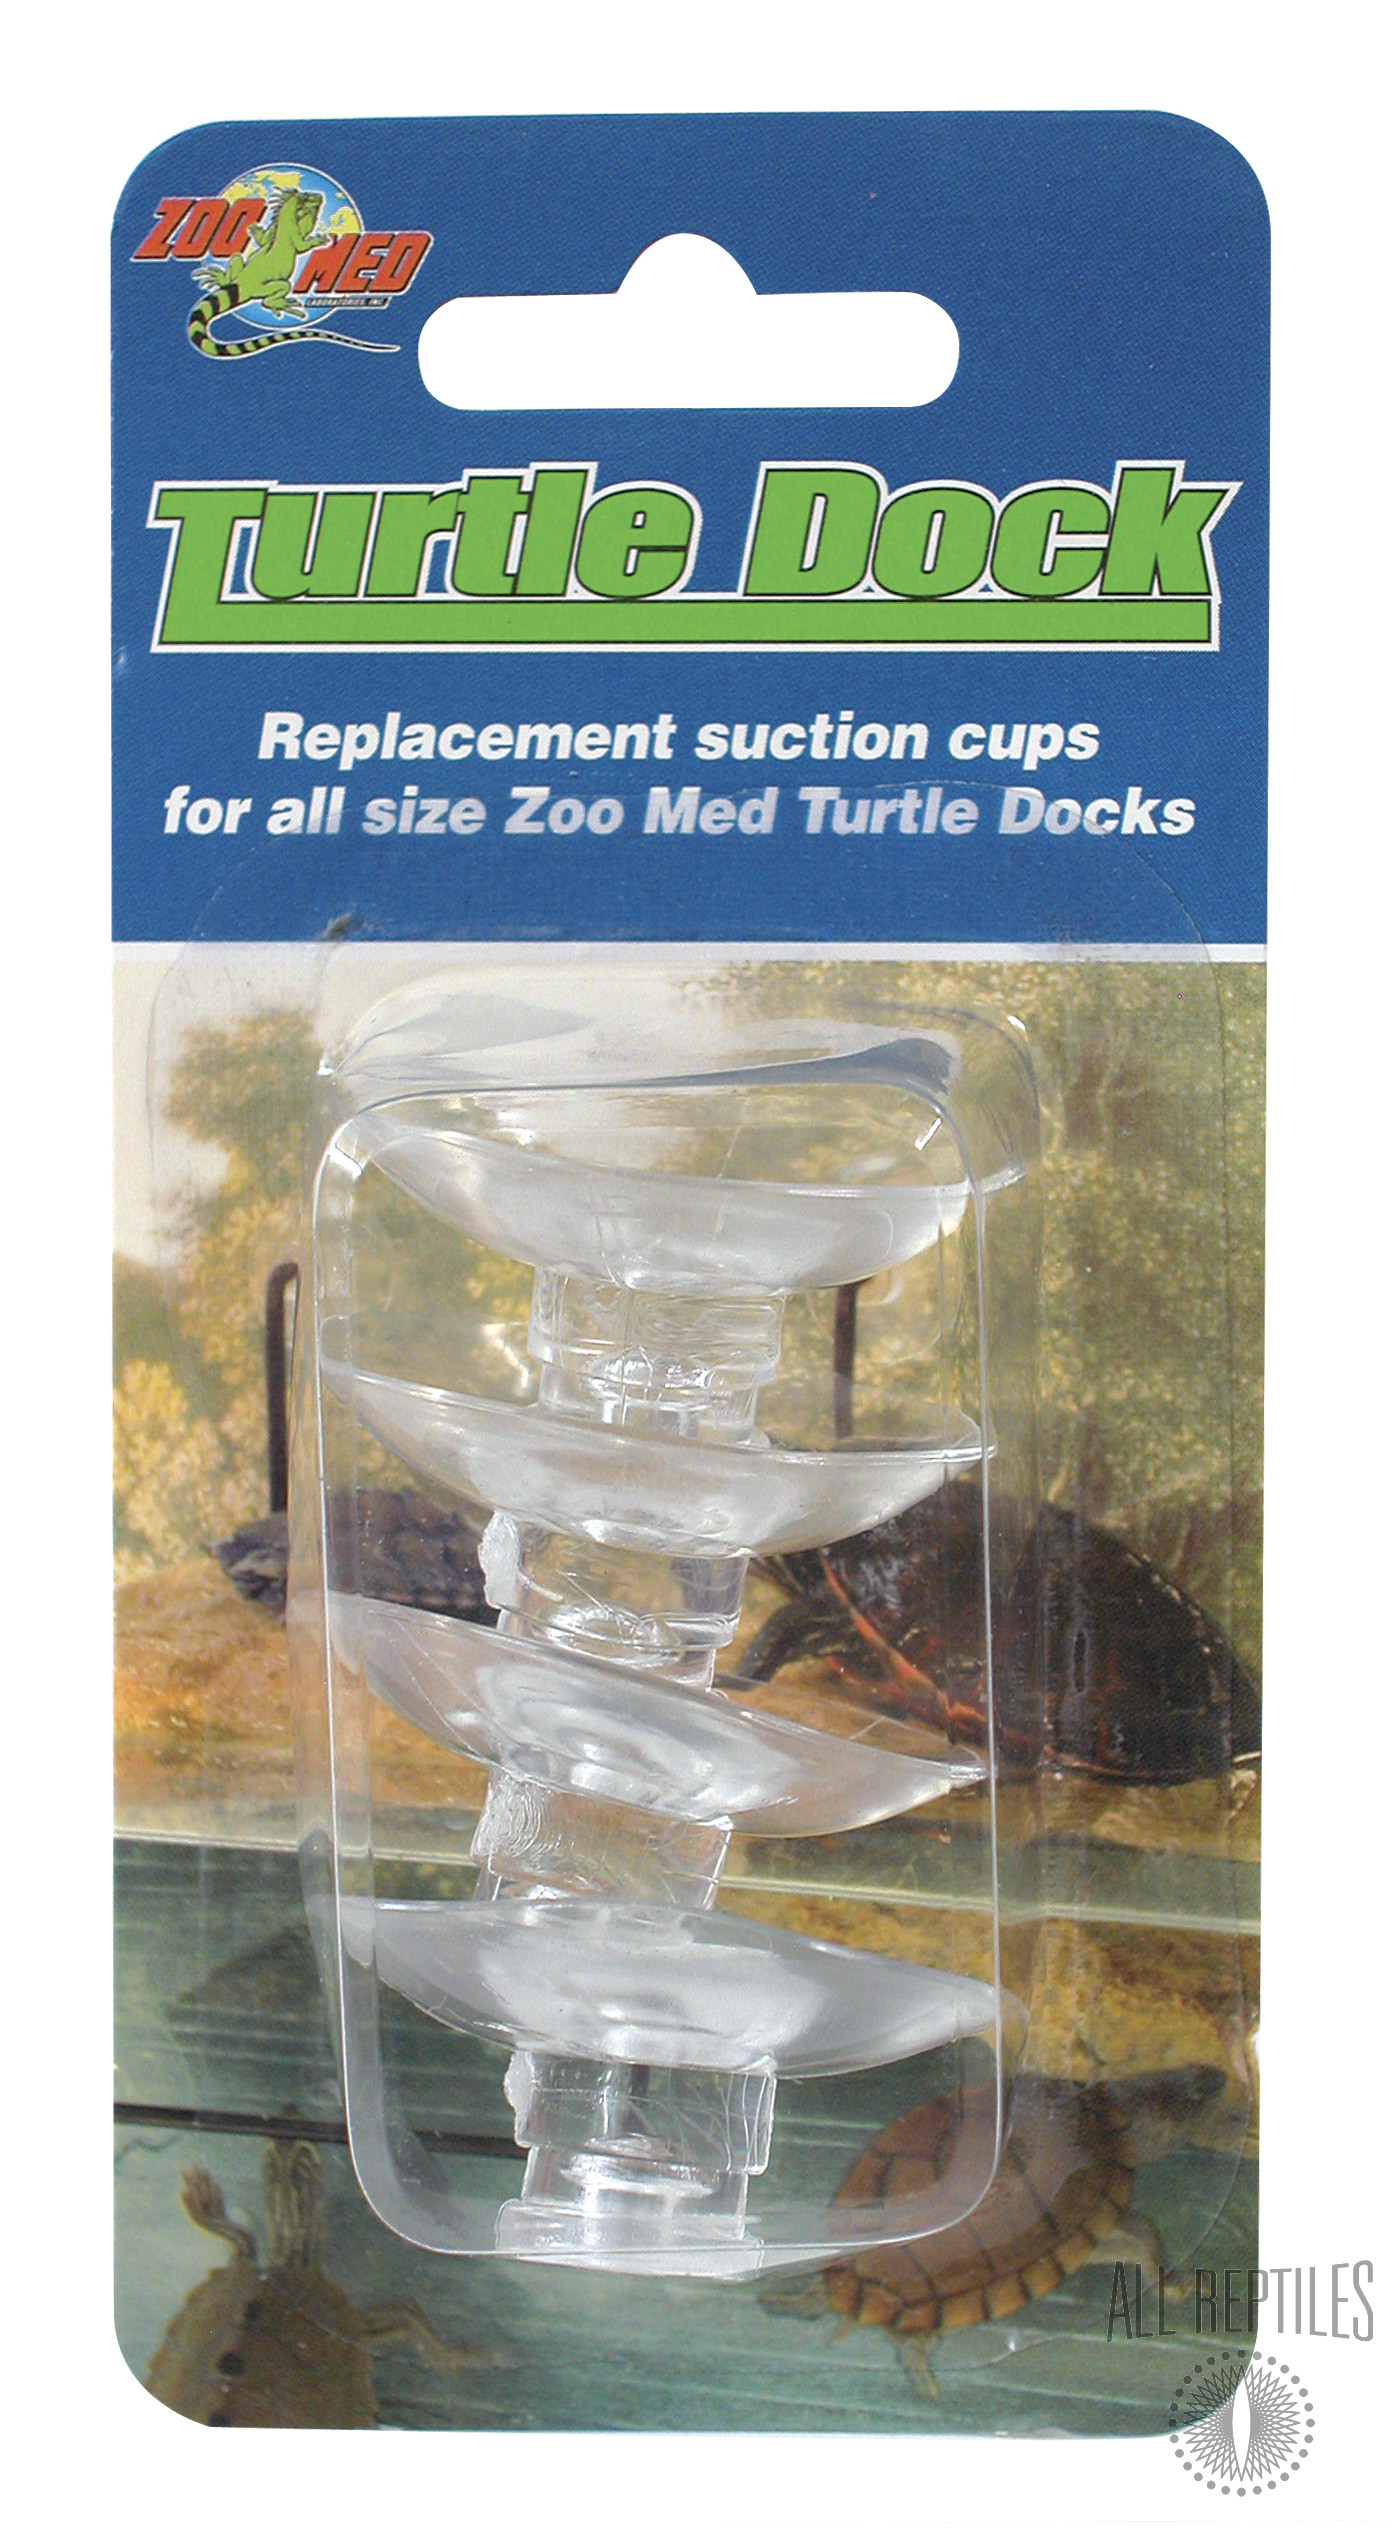 ZM Turtle Dock Suction Cups